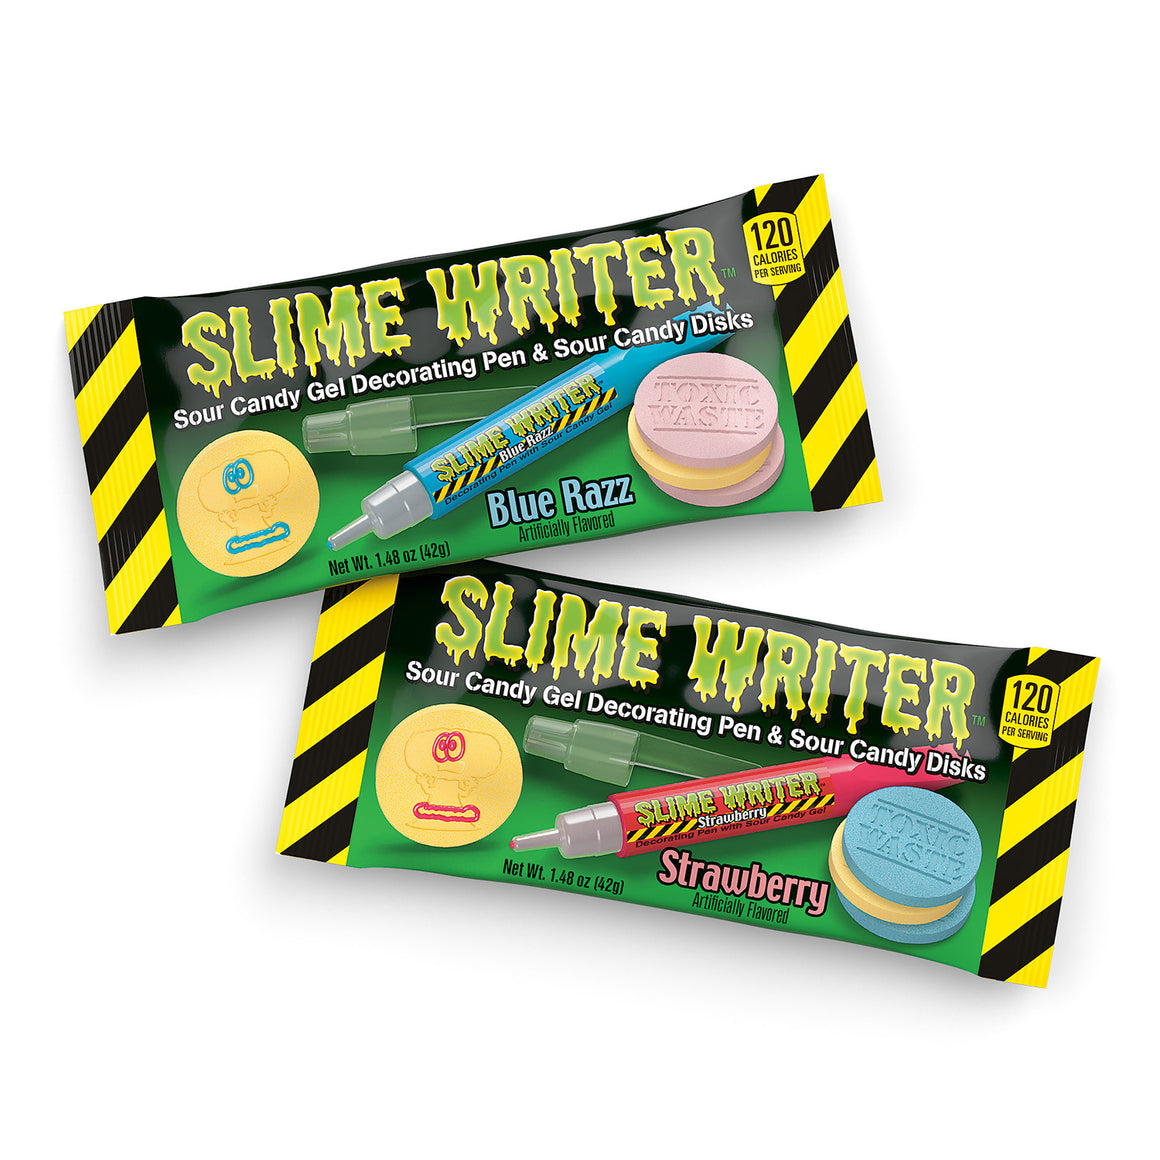 Toxic Waste Brand Slime Writer 1.48 oz. For fresh candy and great service, visit www.allcitycandy.com